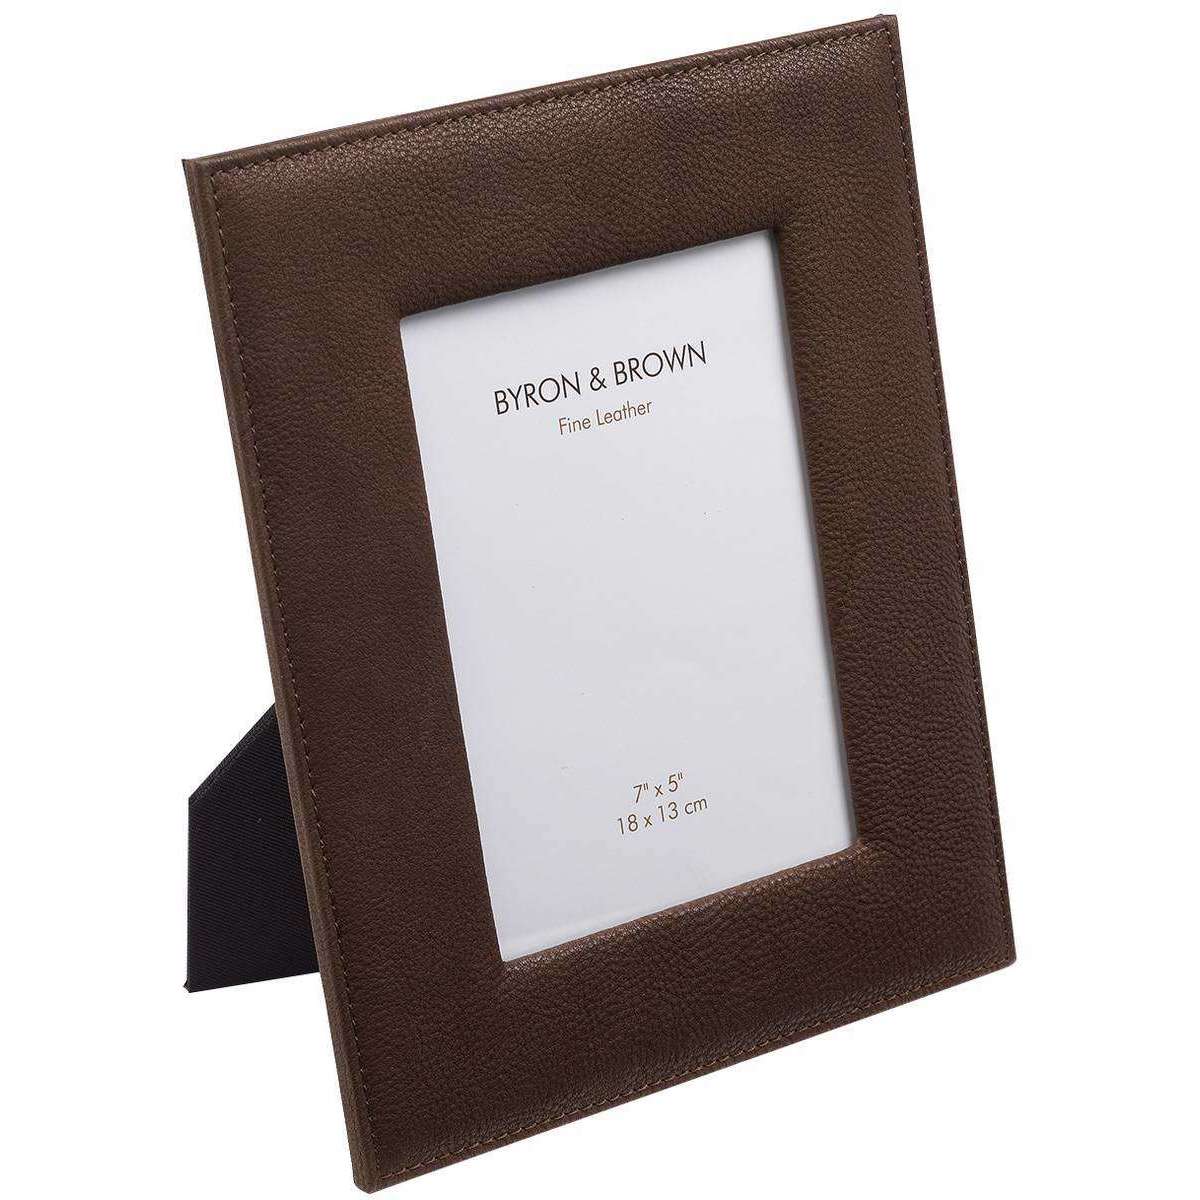 Byron and Brown Vintage Leather Photo Frame 10 x 8 - Chocolate